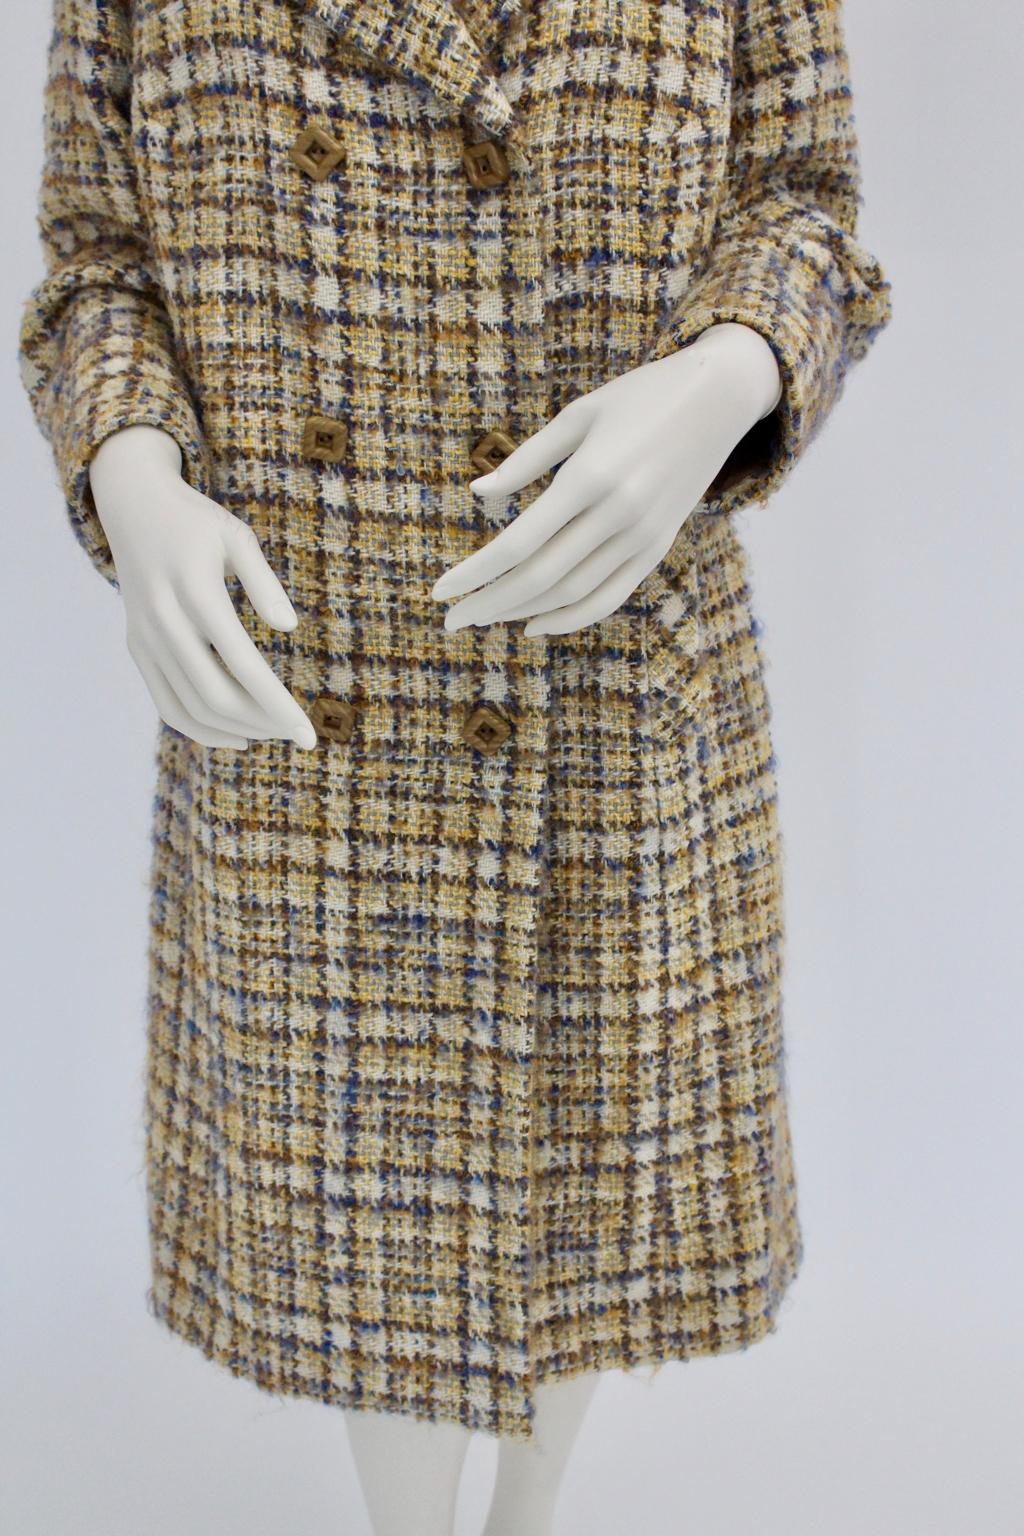 Herbert Schill Wool Tweed Boucle Double Breasted Coat circa 1968 Vienna For Sale 8